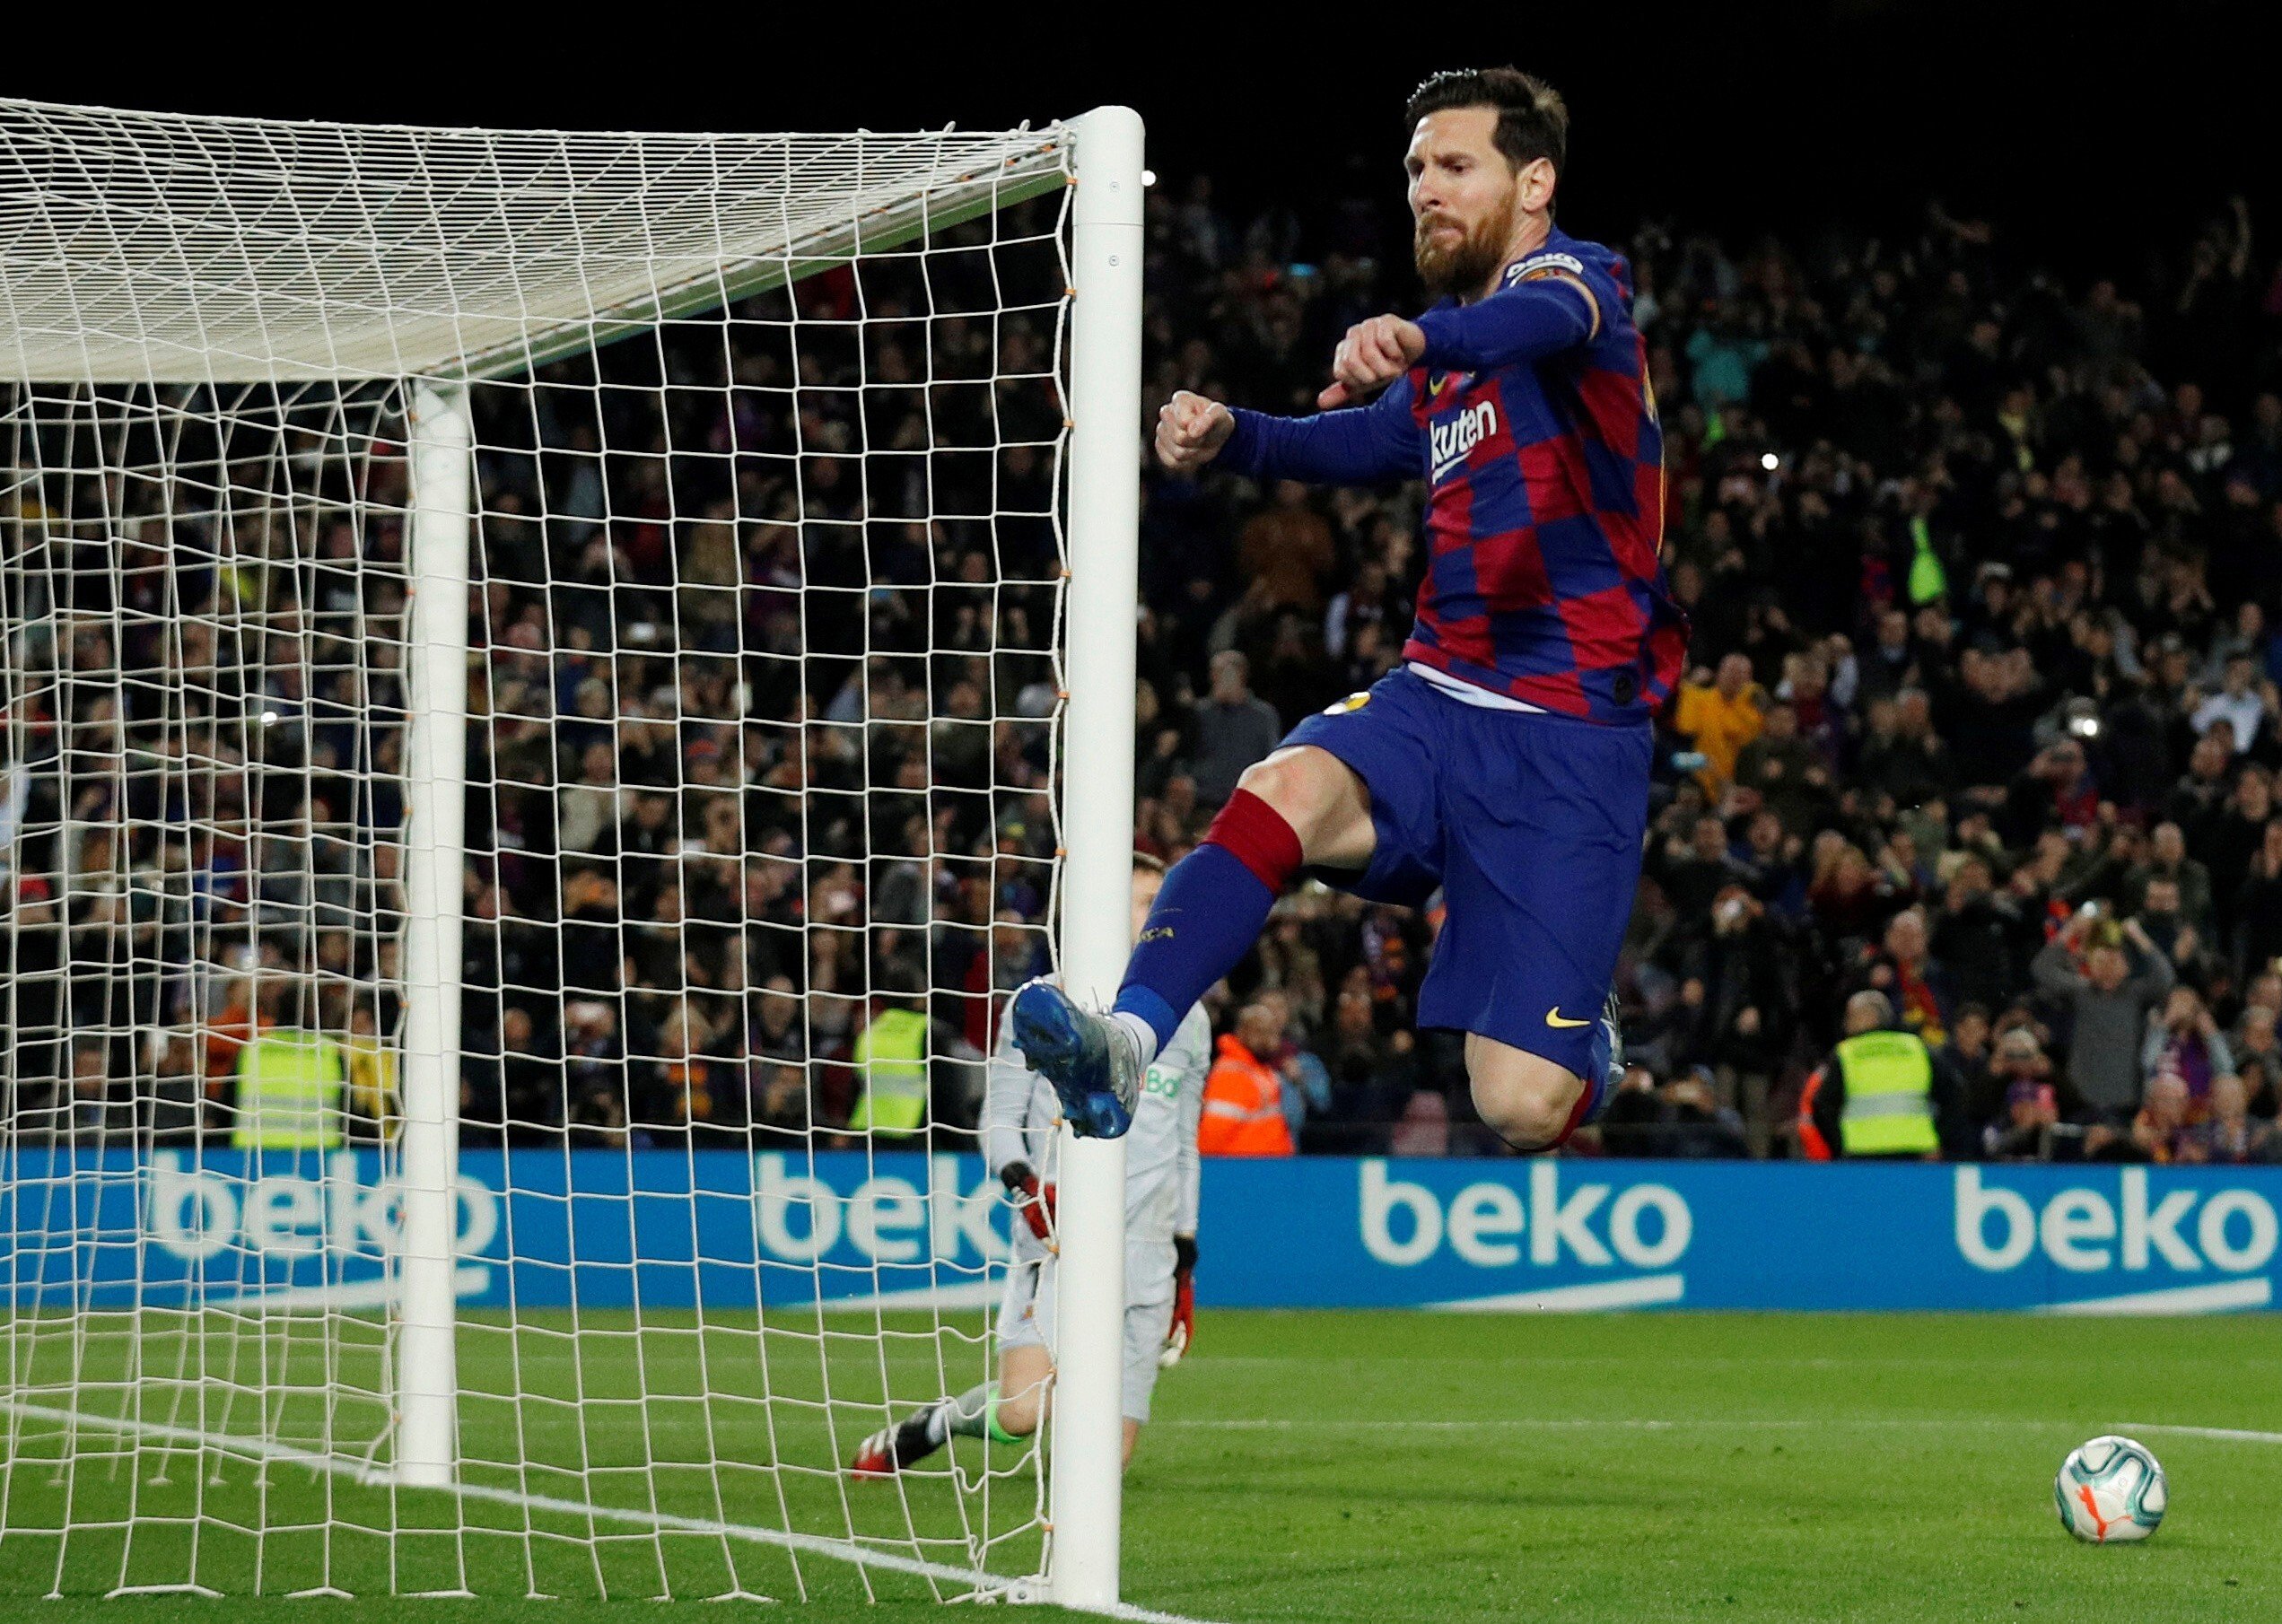 Barcelona’s Lionel Messi celebrates scoring against Real Sociedad in March. Photo: Reuters